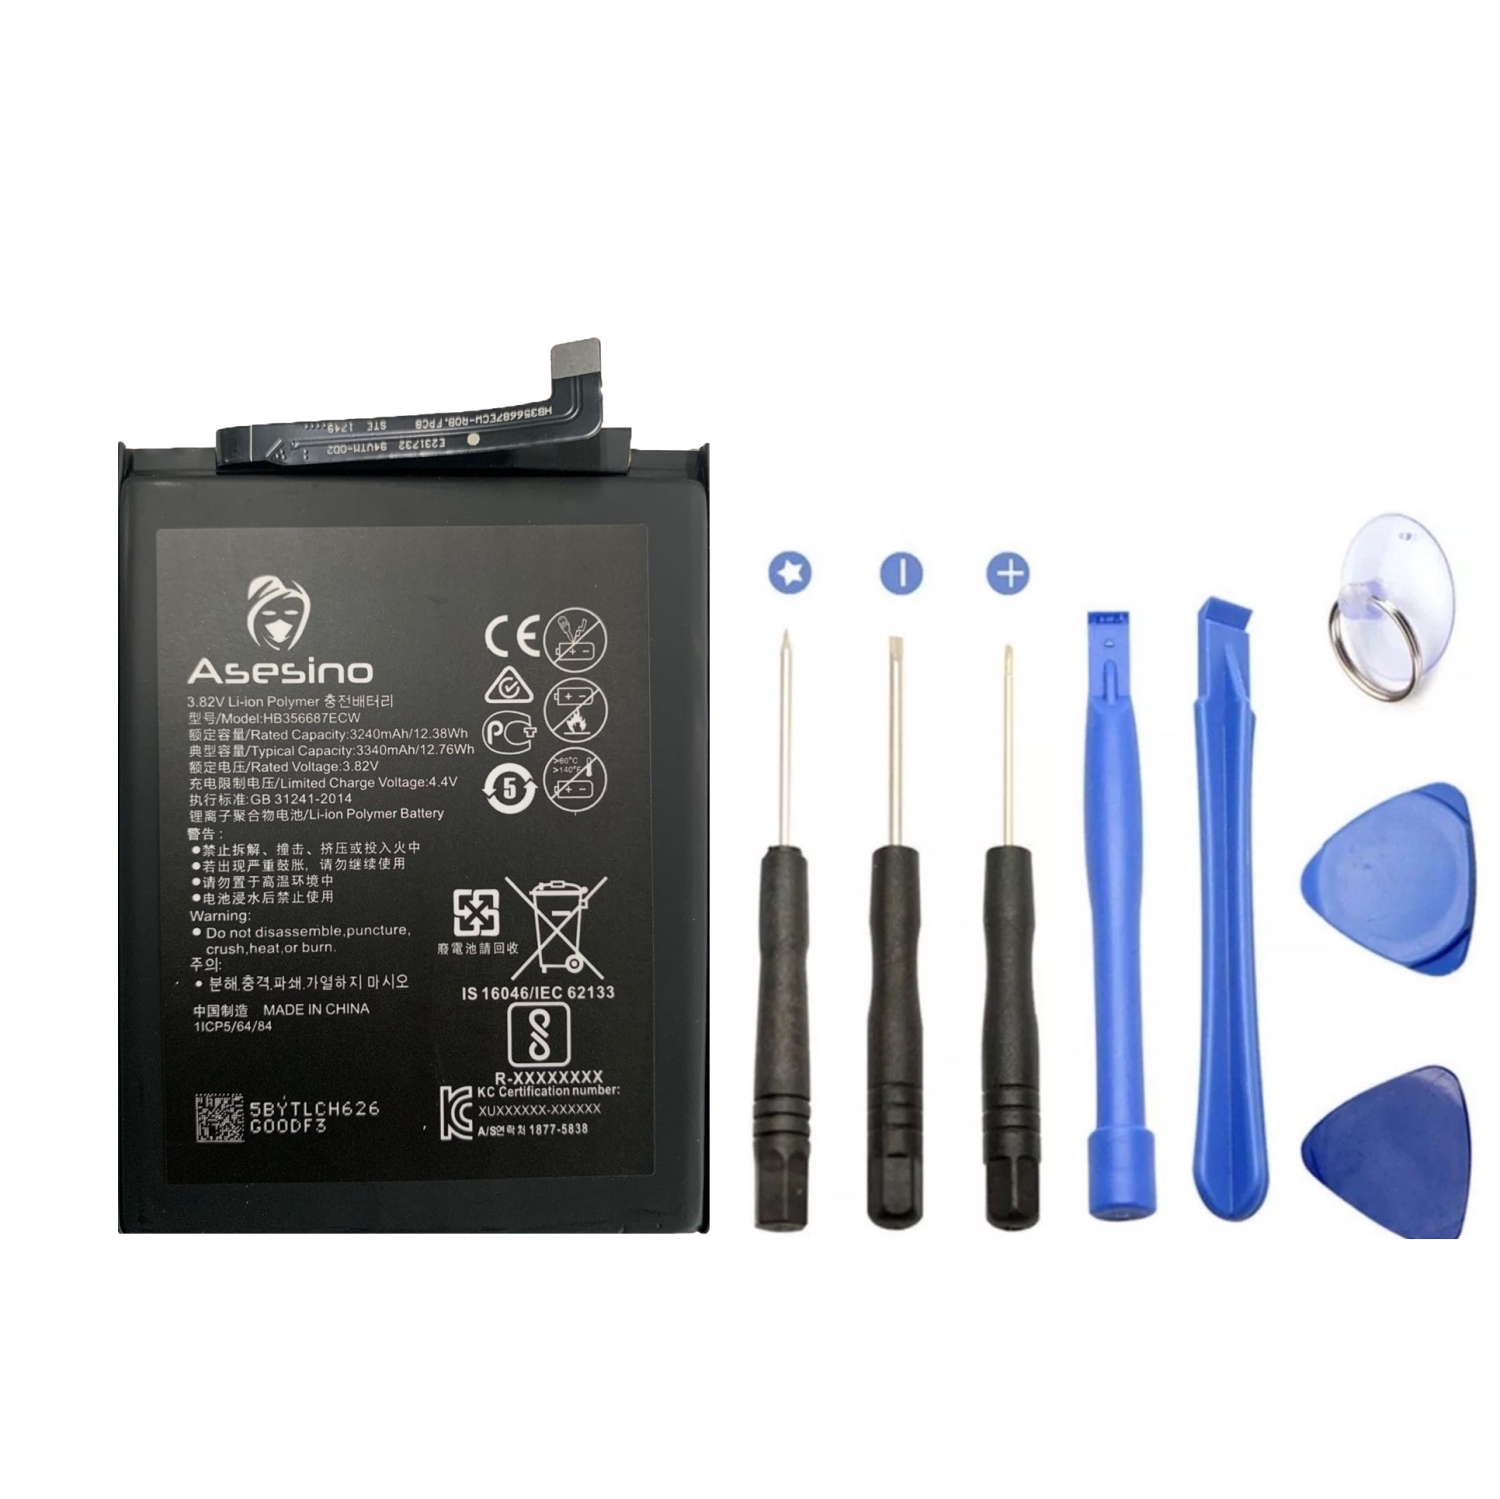 Asesino Replacement Huawei Mate 10 Lite/Nova 2 Plus/Honor 7X Battery (HB356687ECW) with Toolkit